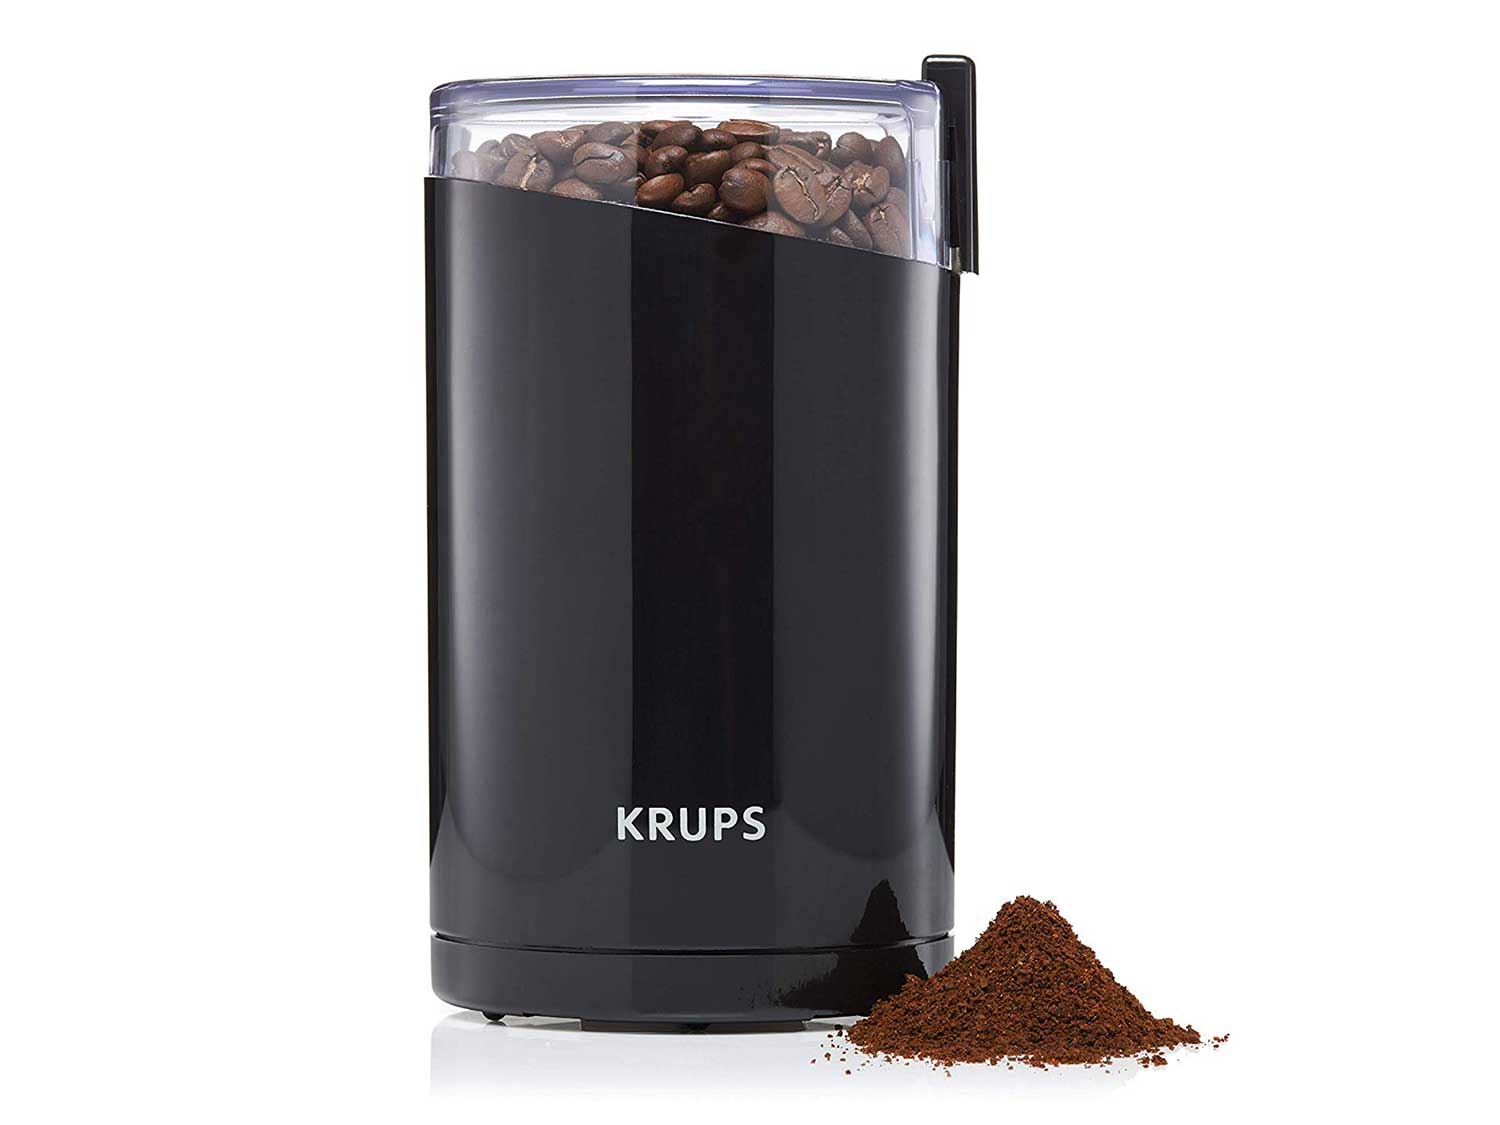 Krups F203 Electric Spice and Coffee Grinder